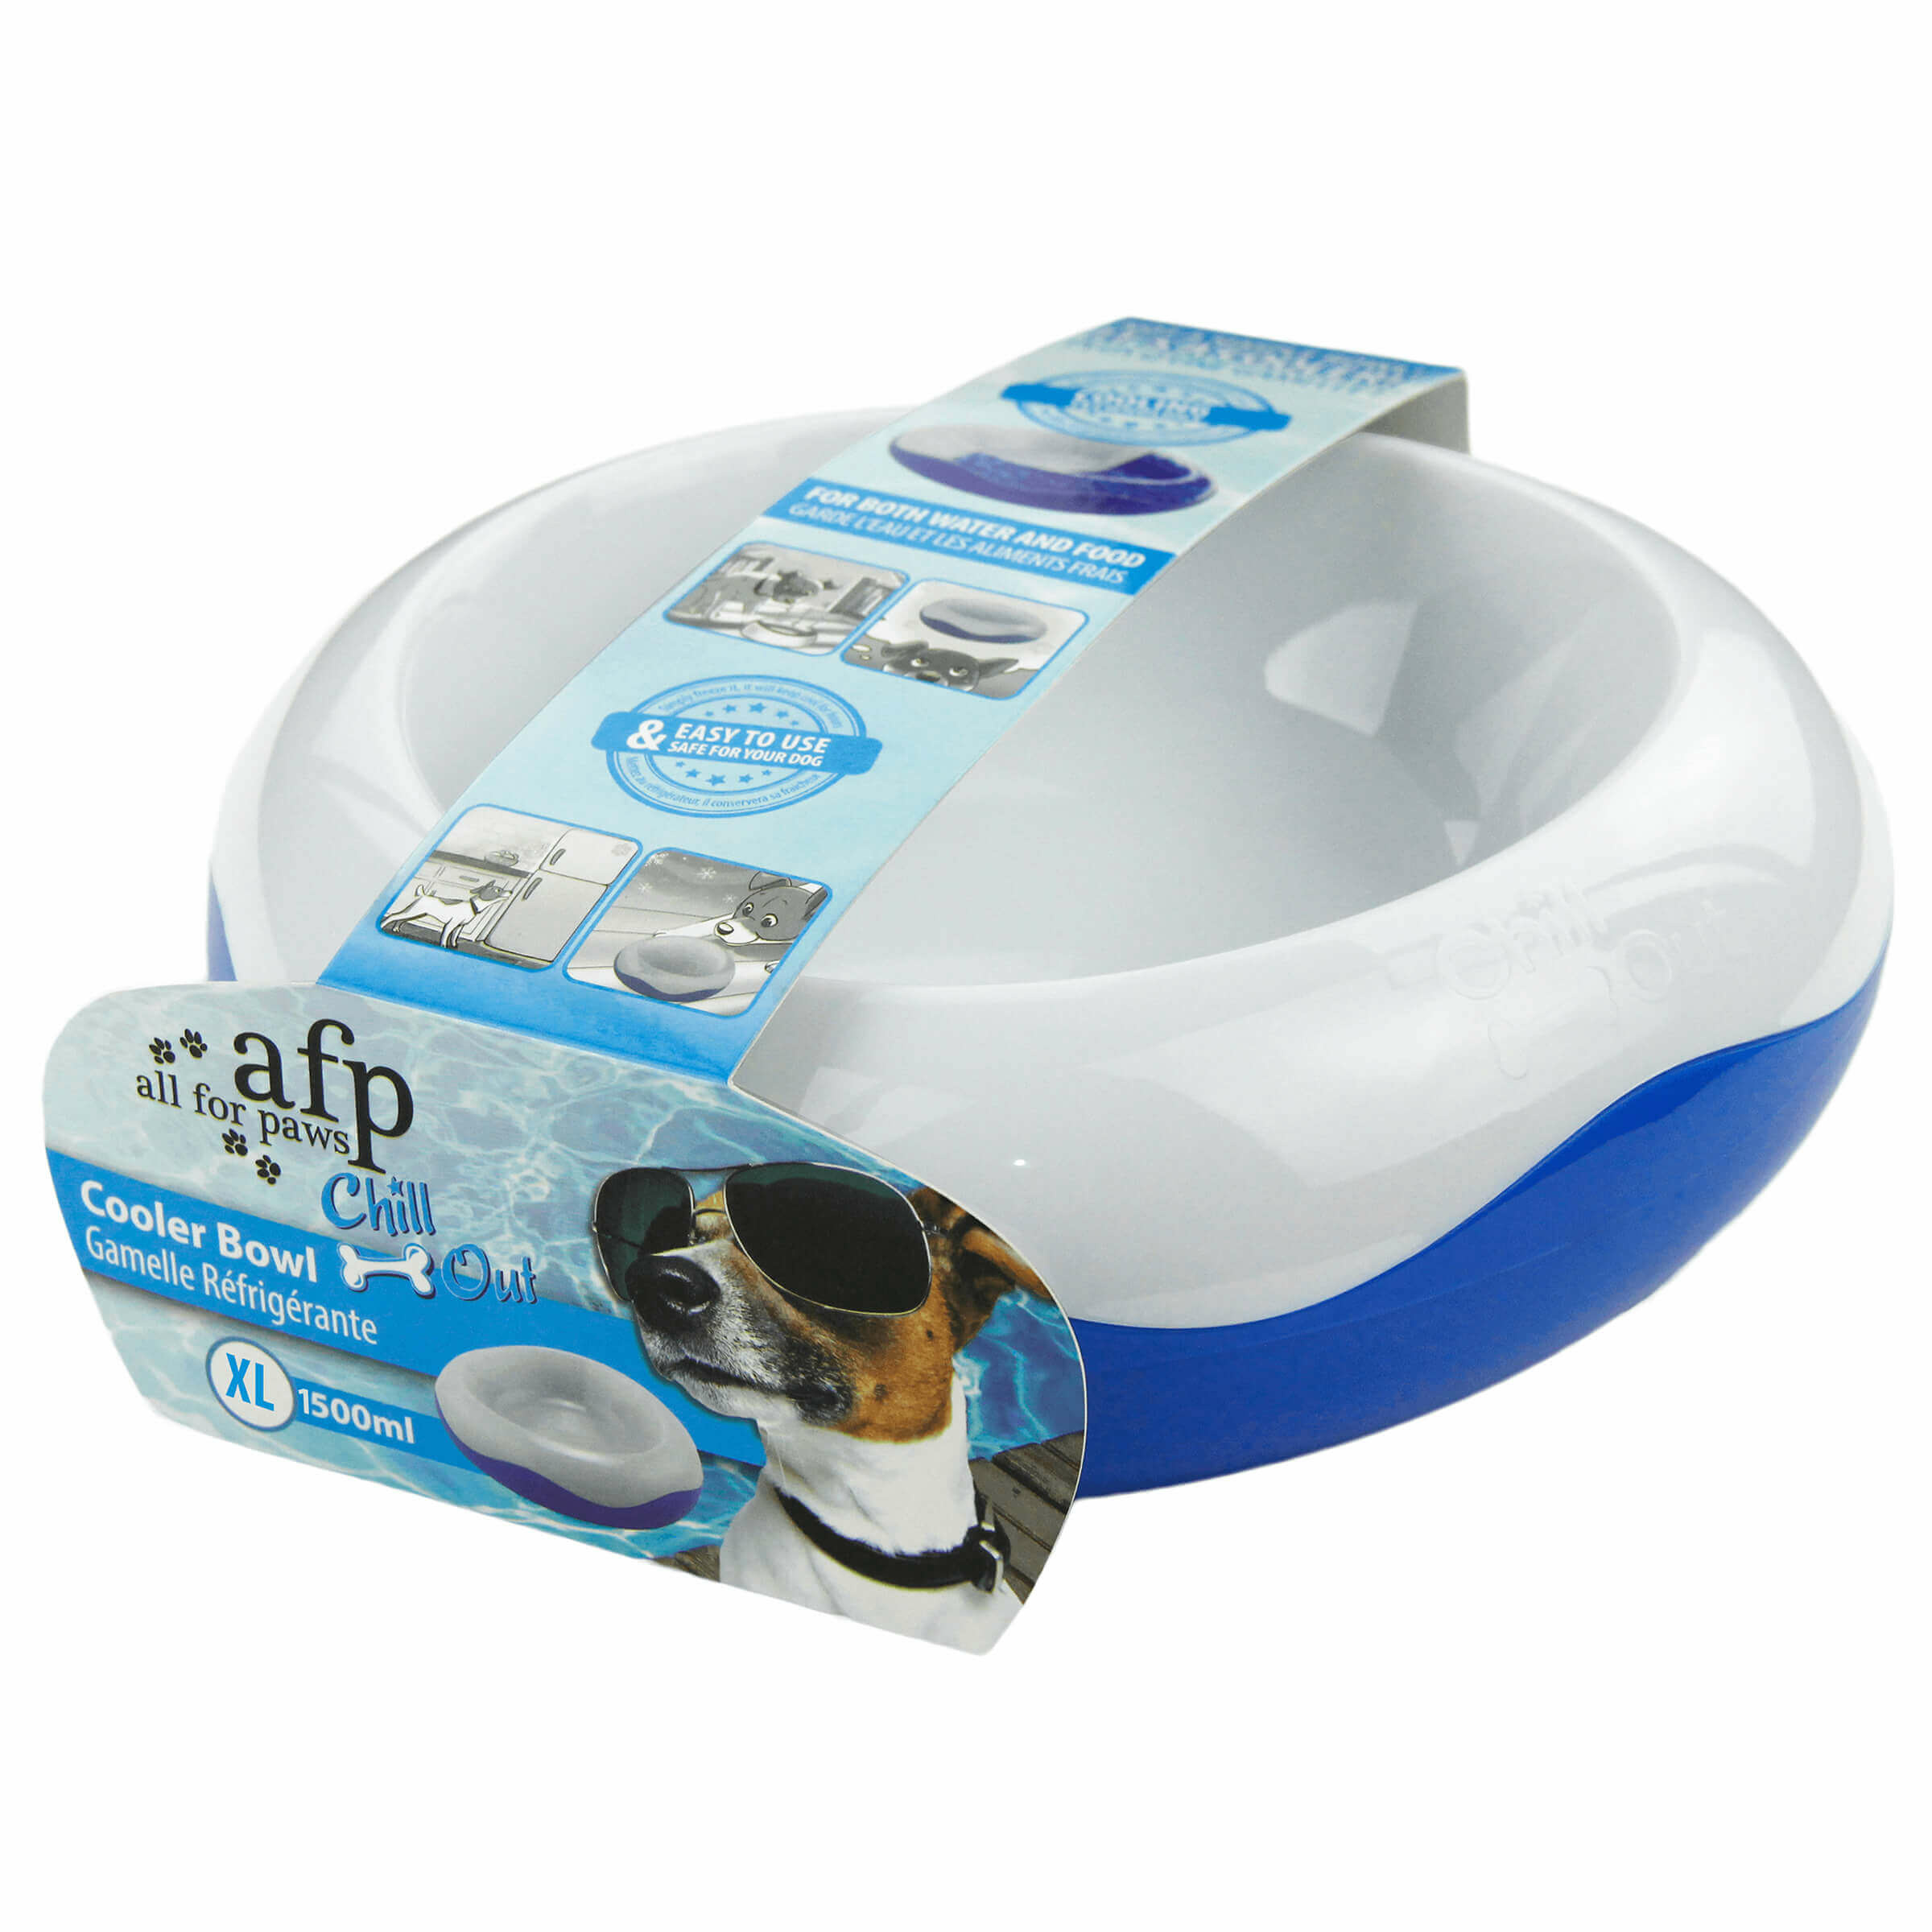 All for Paws Chill Out Cooler Bowl Taille XL 1500ml